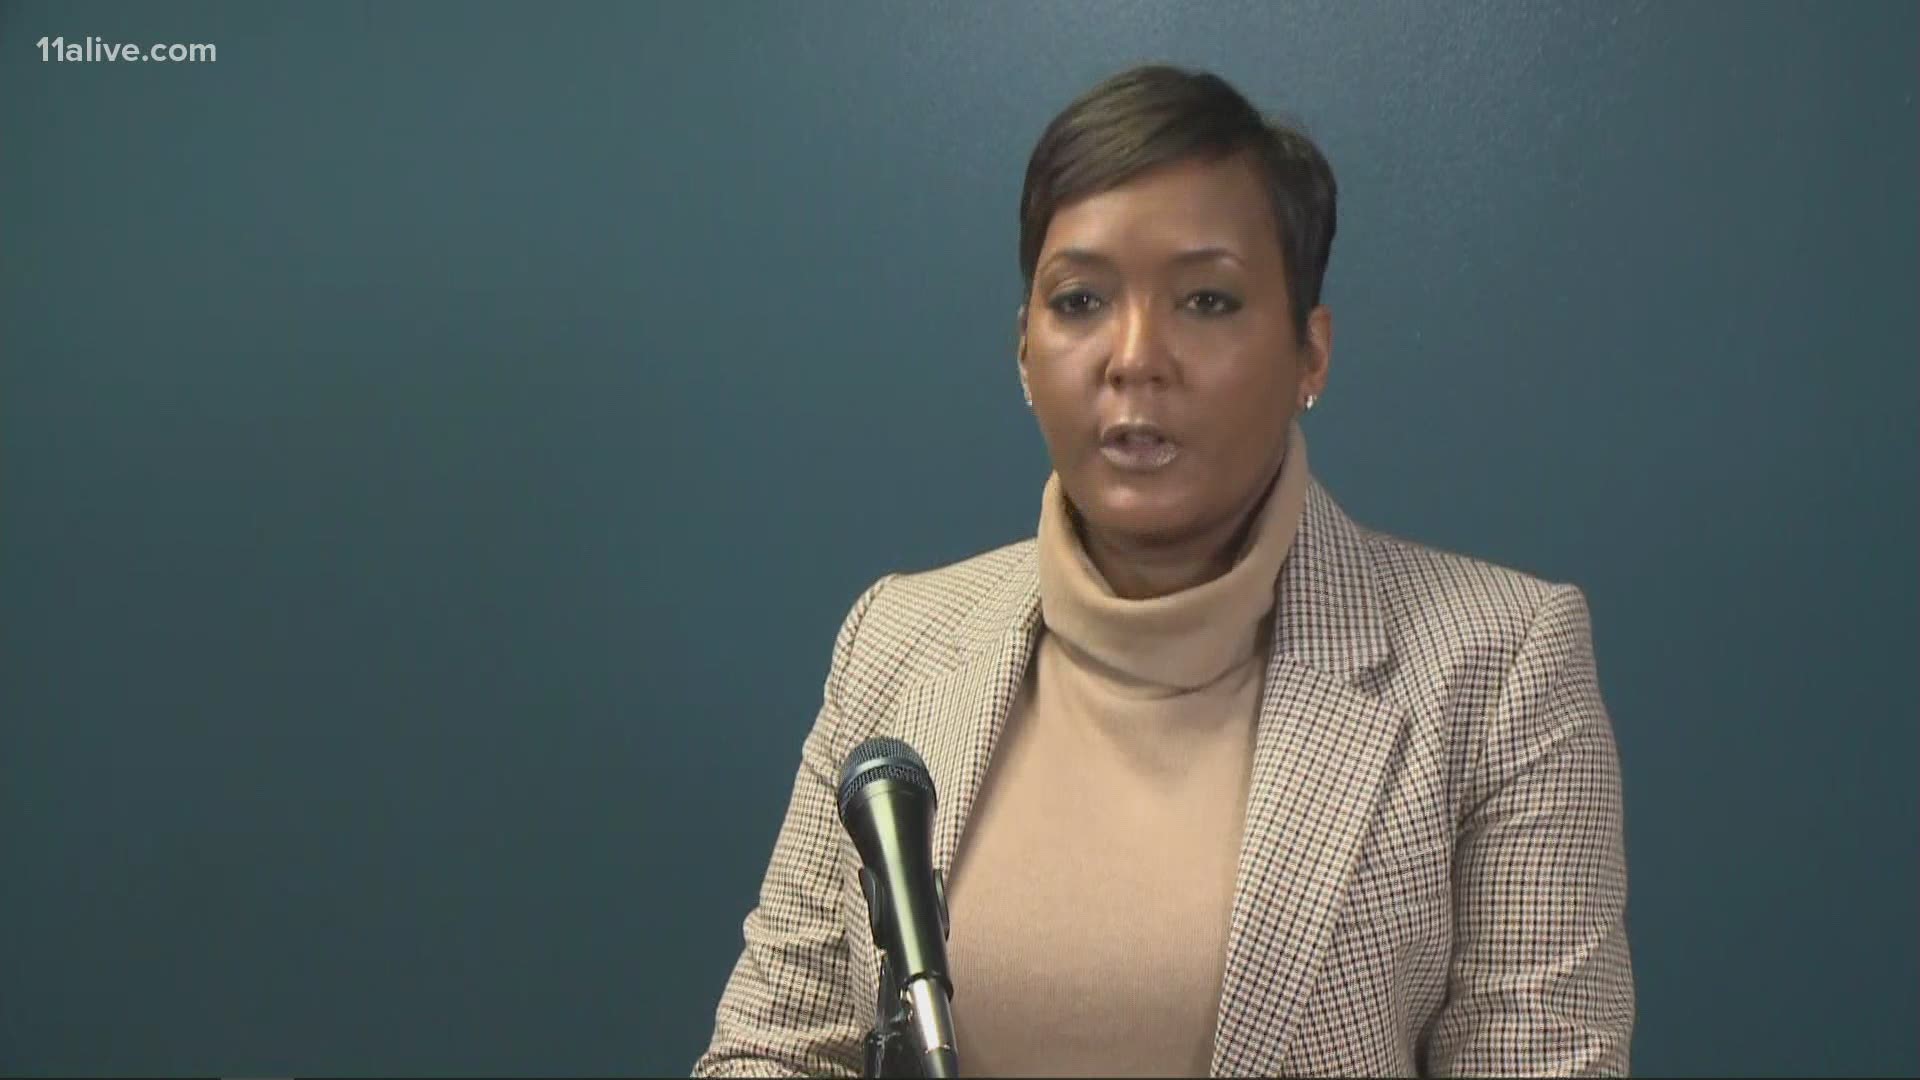 She spoke on Tuesday at a news conference for an update in the shooting death of a 7-year-old girl.